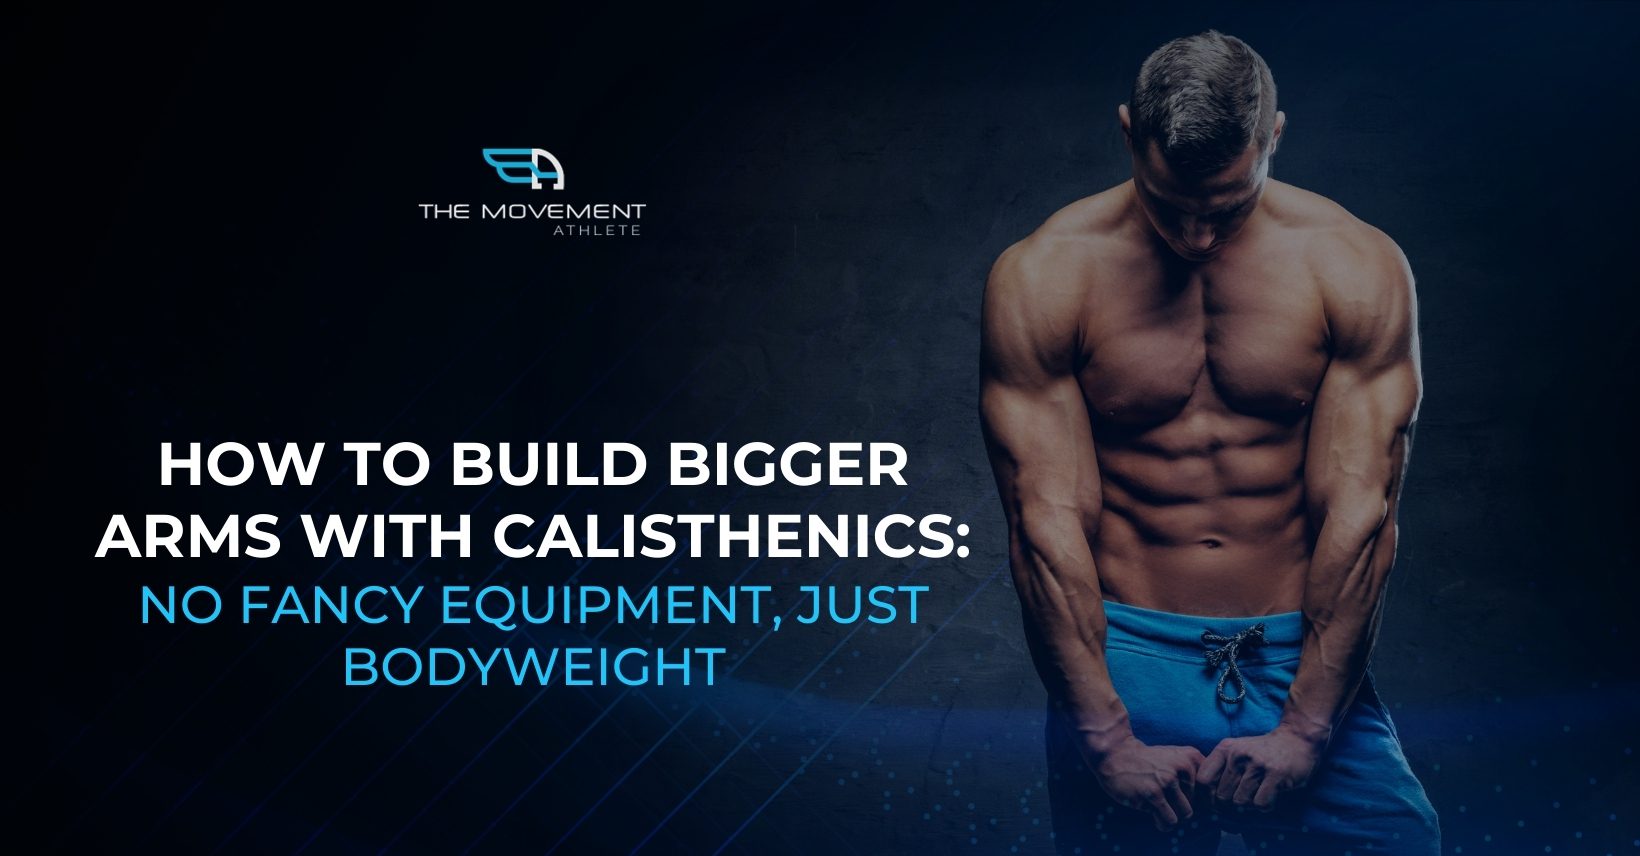 How To Build Bigger Arms With Calisthenics: No Fancy Equipment, Just  Bodyweight - The Movement Athlete